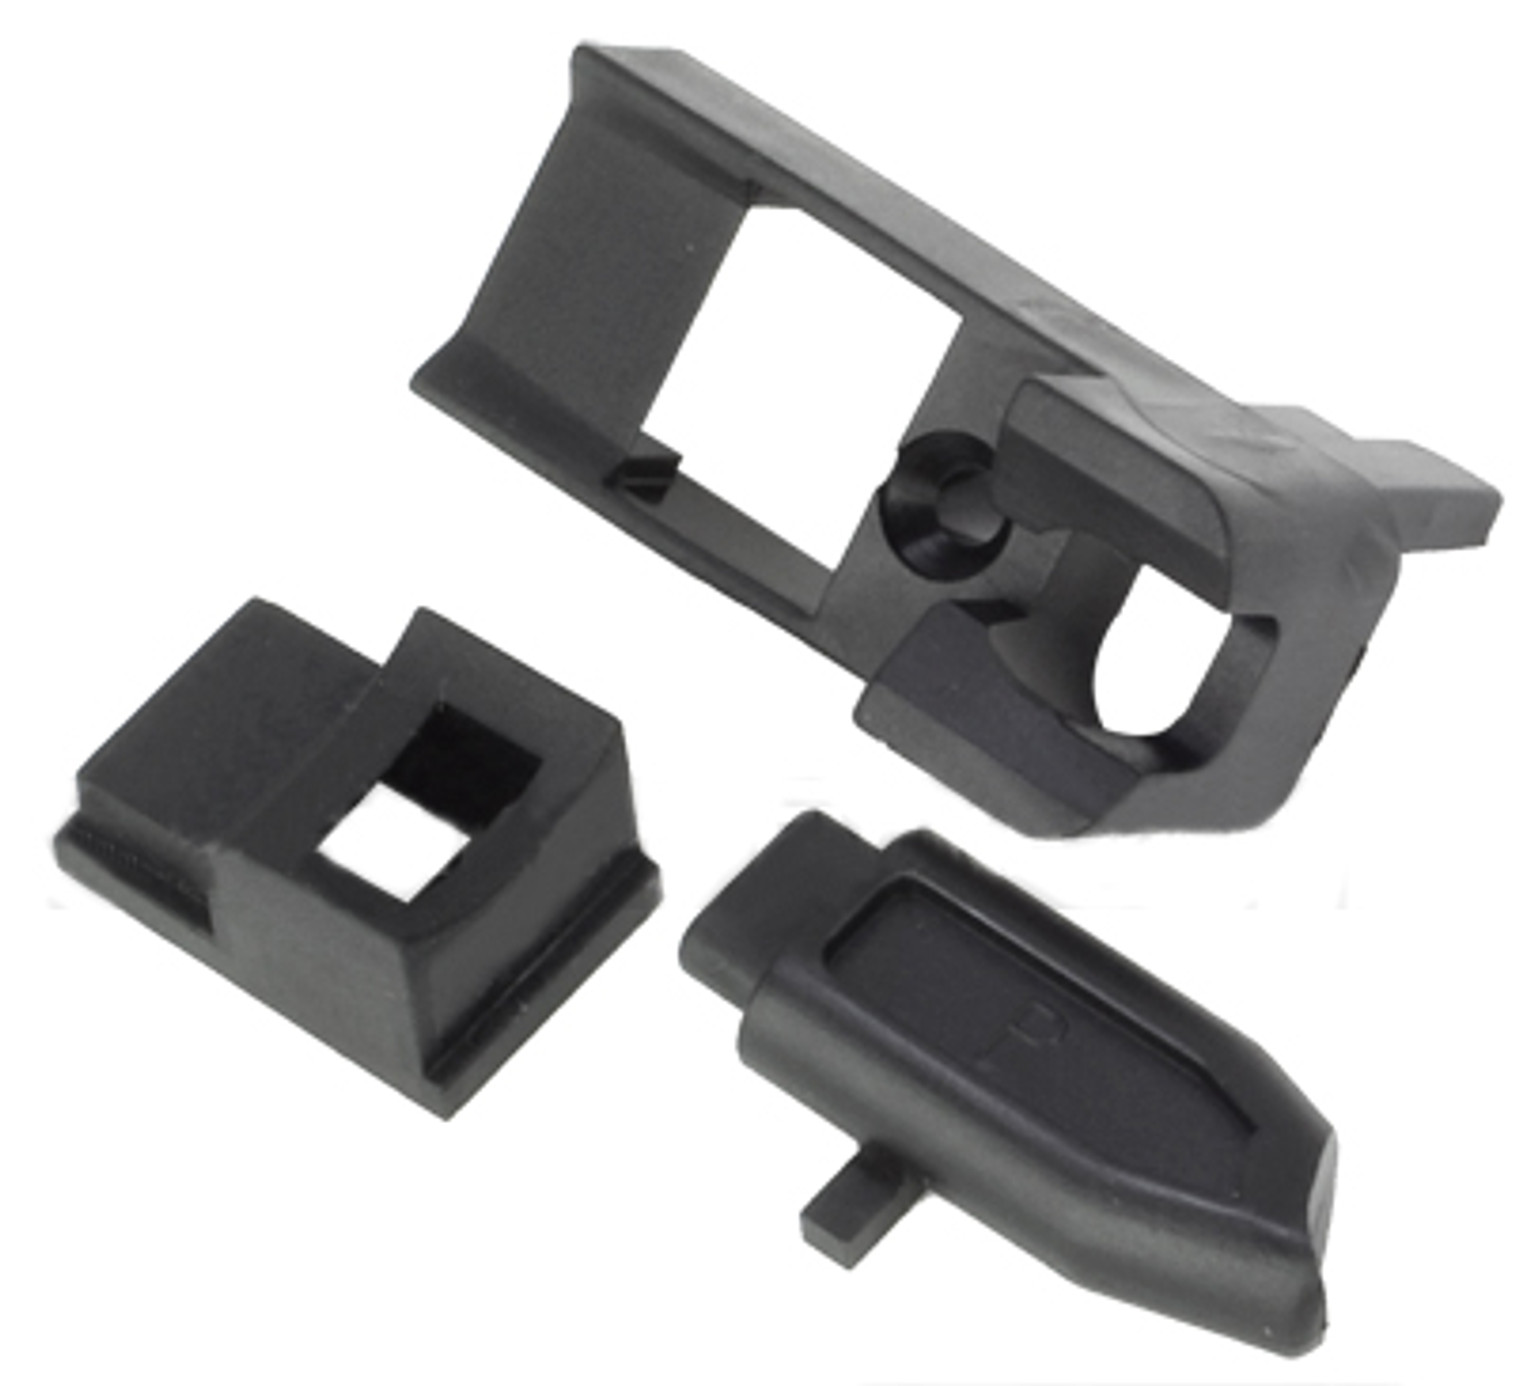 Replacement / Conversion Magazine Lip & Follower set for WE PDW Open Bolt System "ABS Type" Magazine